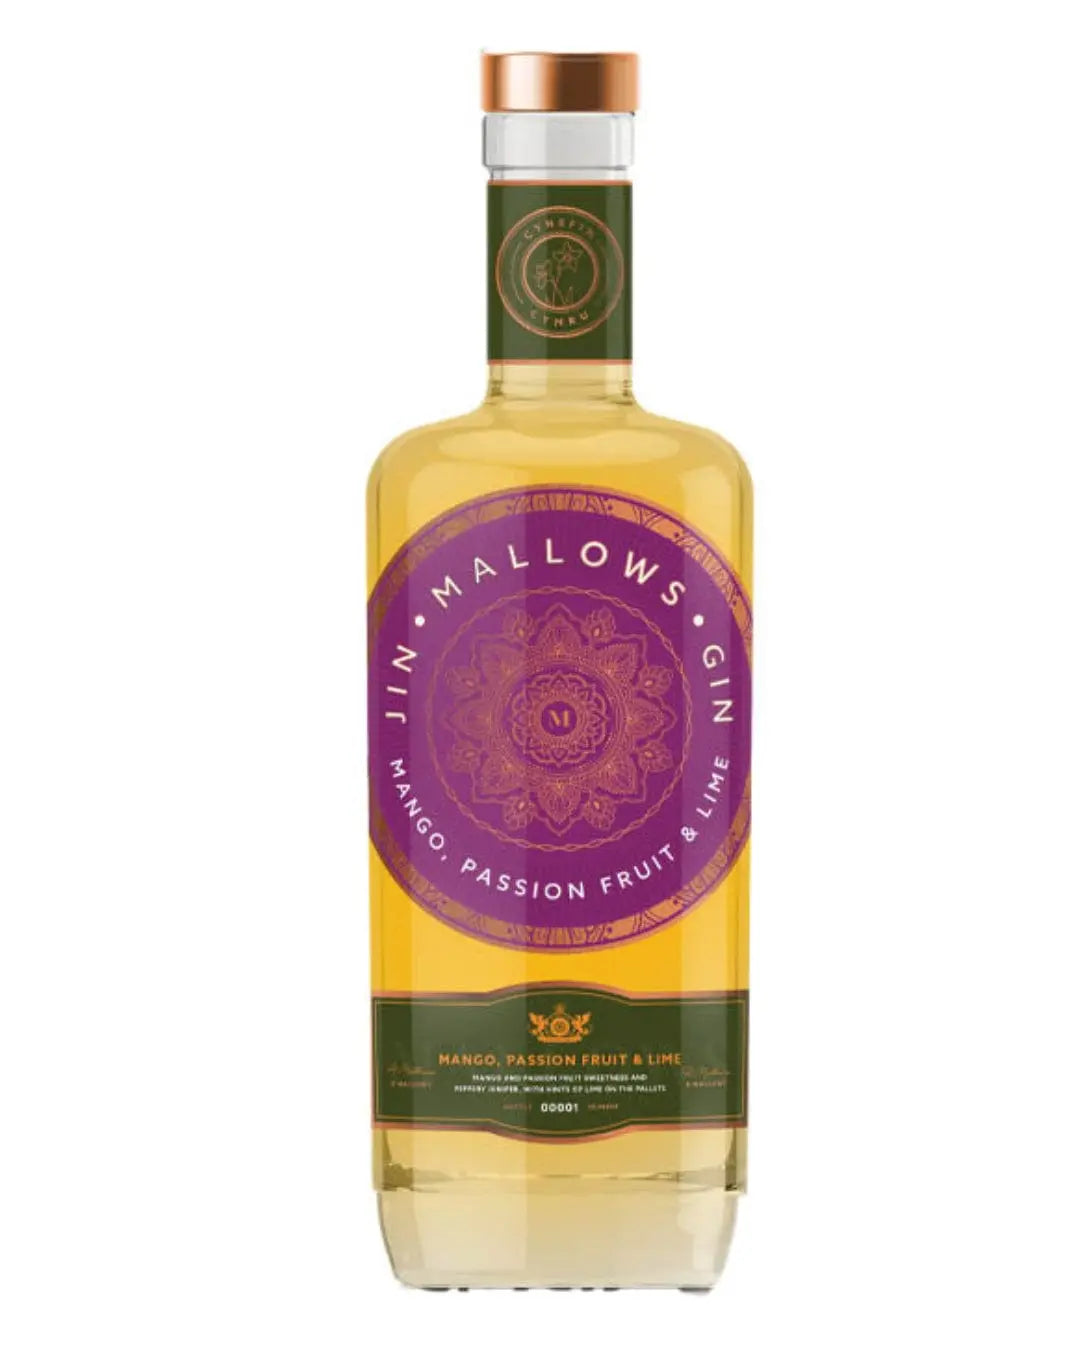 Mallows Mango, Passion Fruit & Lime Flavoured Gin, 70 cl Gin